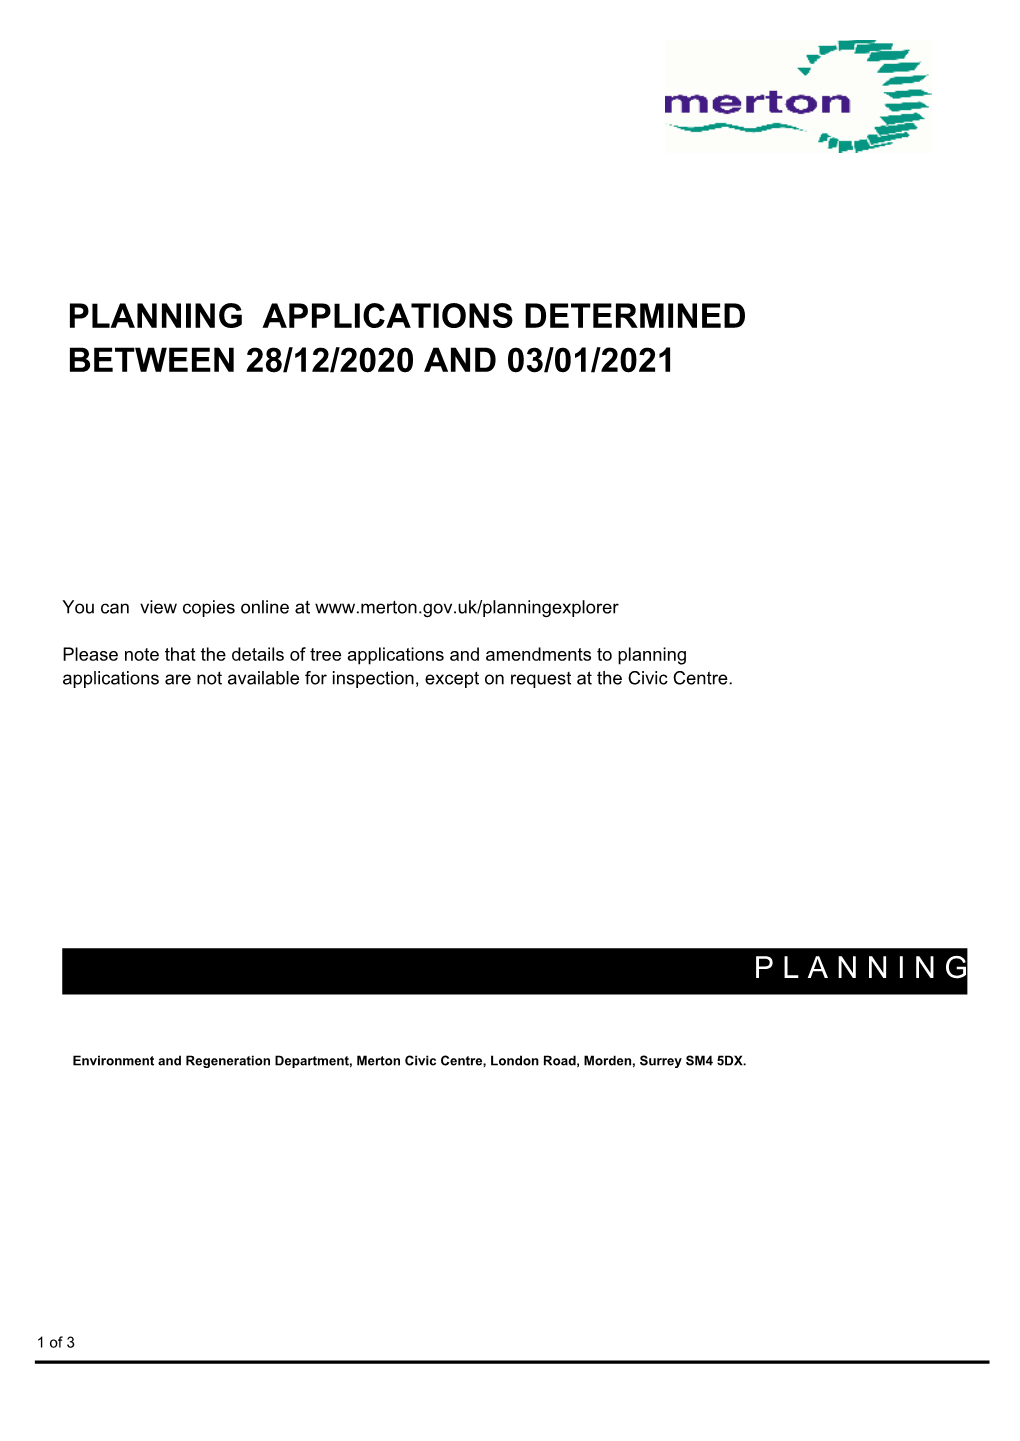 Planning Applications Determined Between 28/12/2020 and 03/01/2021